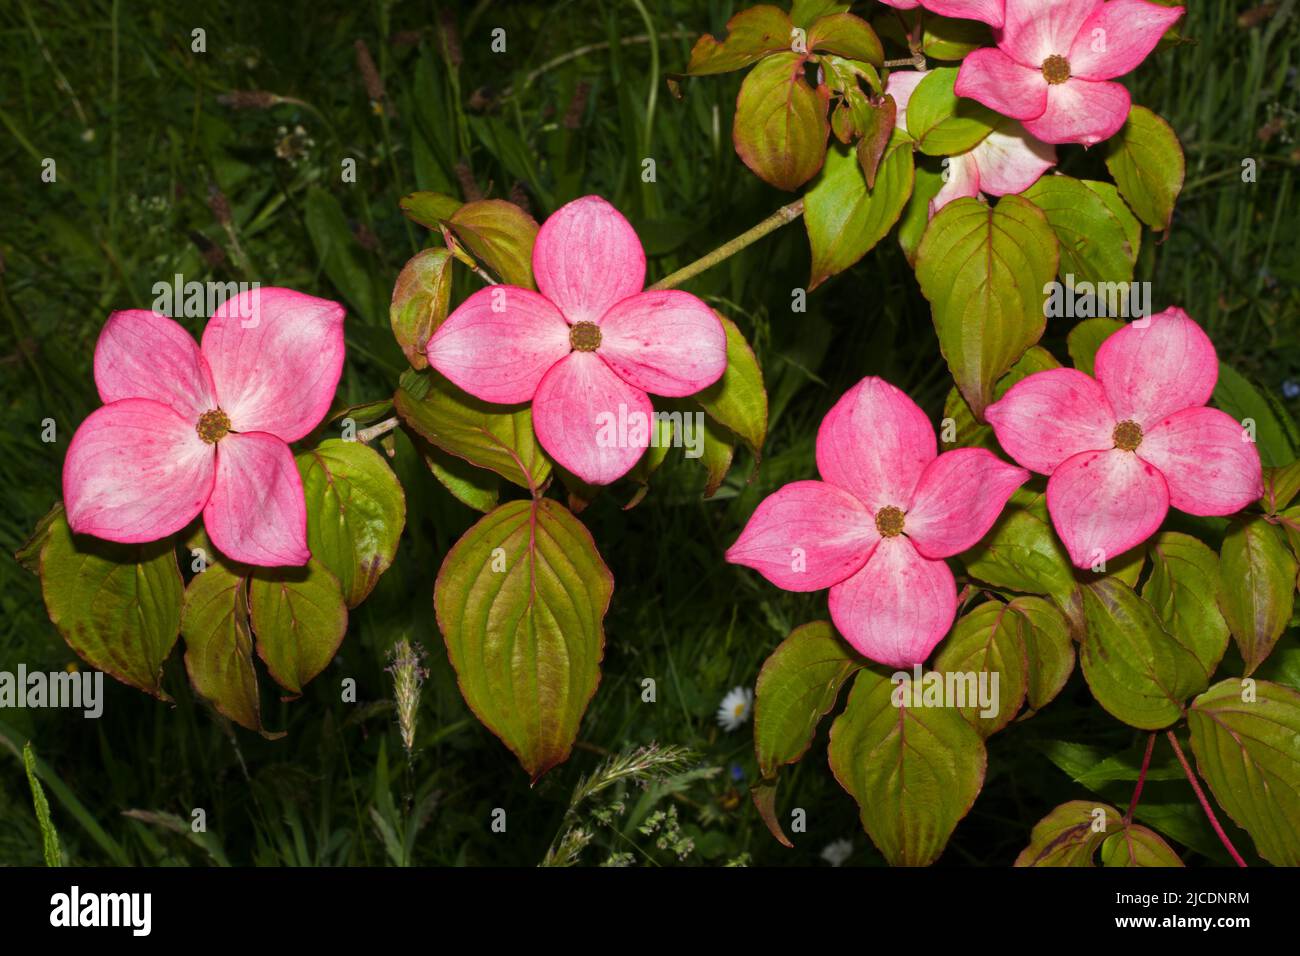 Cornus kousa (Chinese dogwood) is a small deciduous tree native to East Asia but now widely cultivated as an ornamental plant. Stock Photo